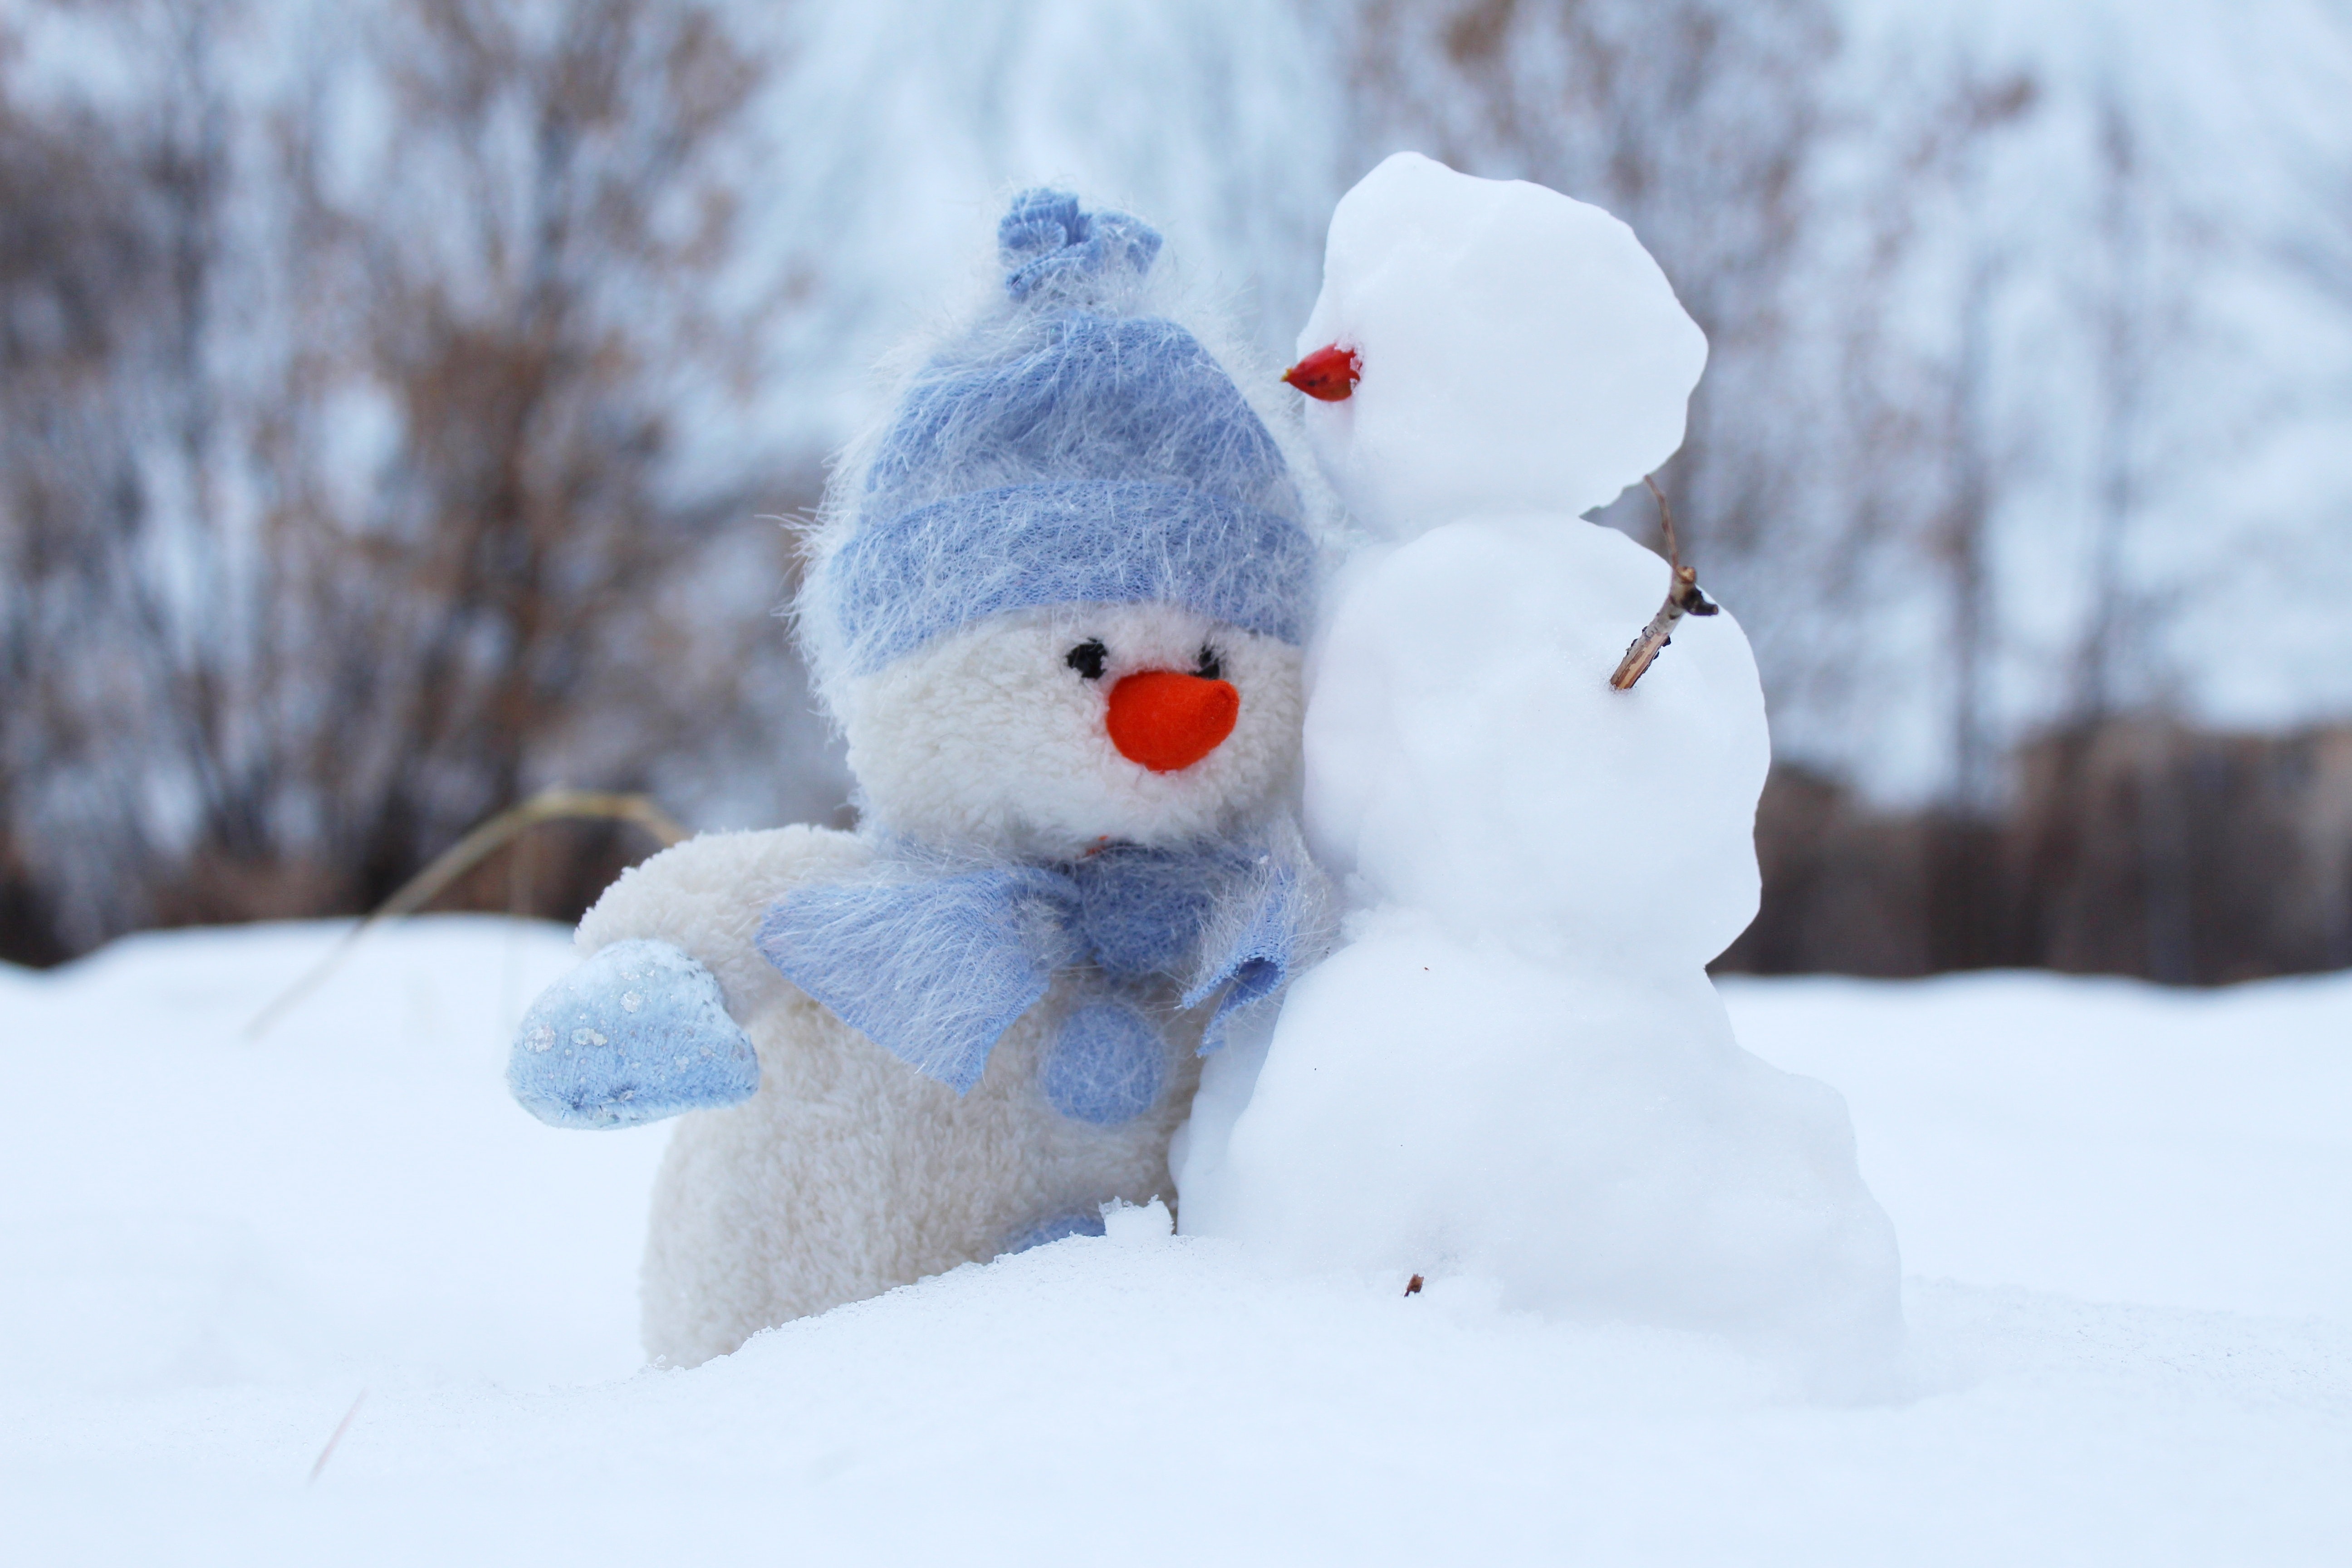 Winter ready? Make sure your business is prepared 